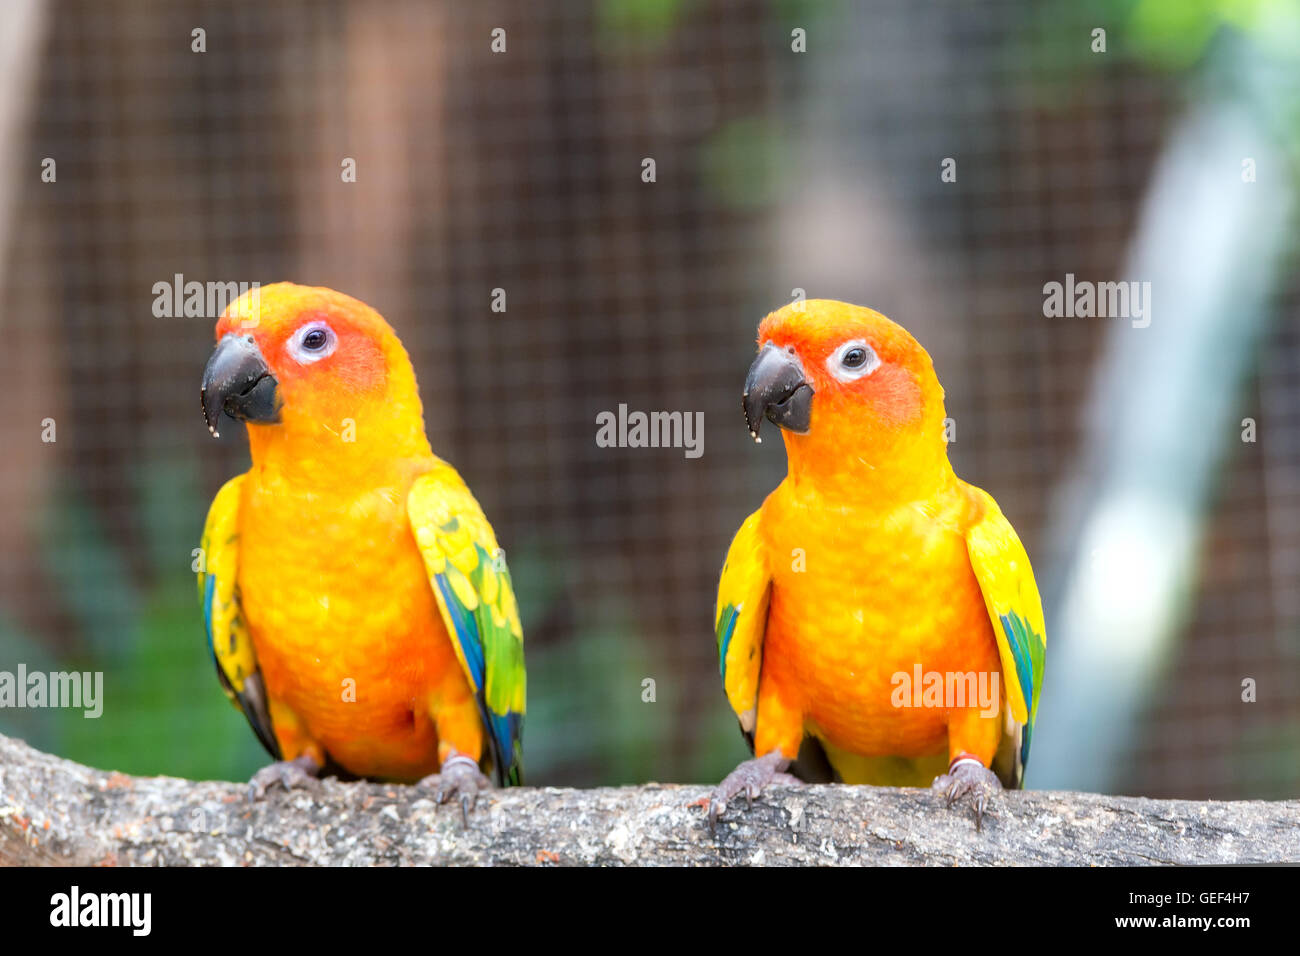 Lovely sun conure parrot birds on the perch. Pair of colorful sun conure parrot birds interacting. Stock Photo